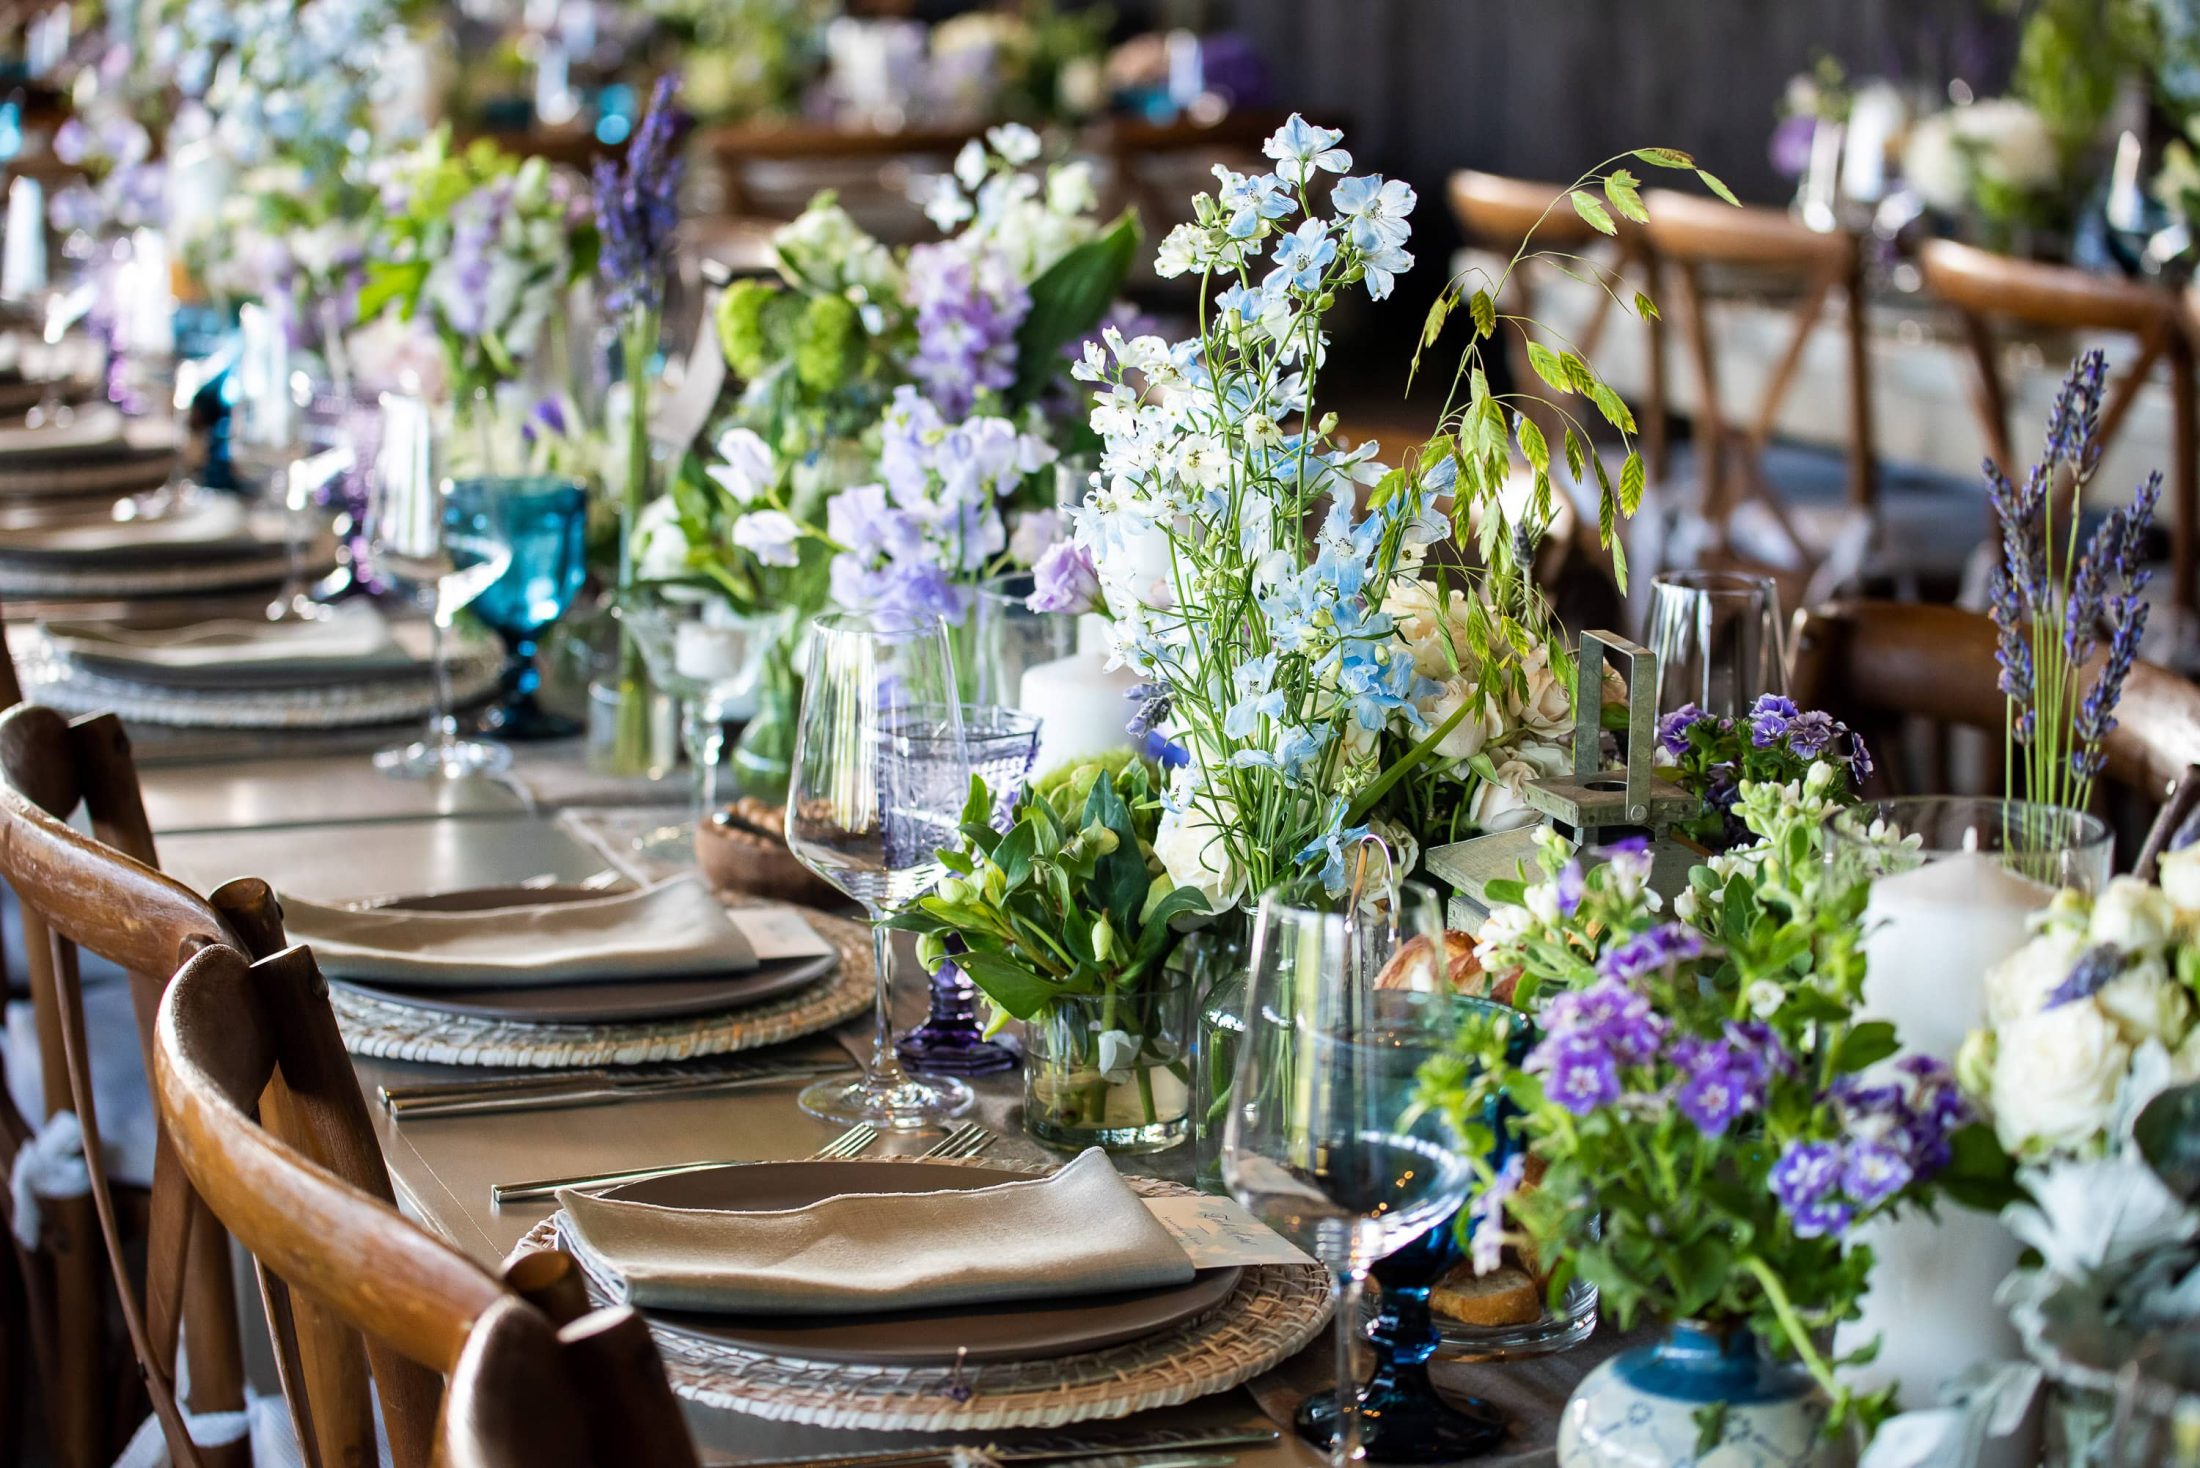 Table and floral decor at this Hamptons wedding weekend held at The Parrish Museum | Photo by Roey Yohai Studio